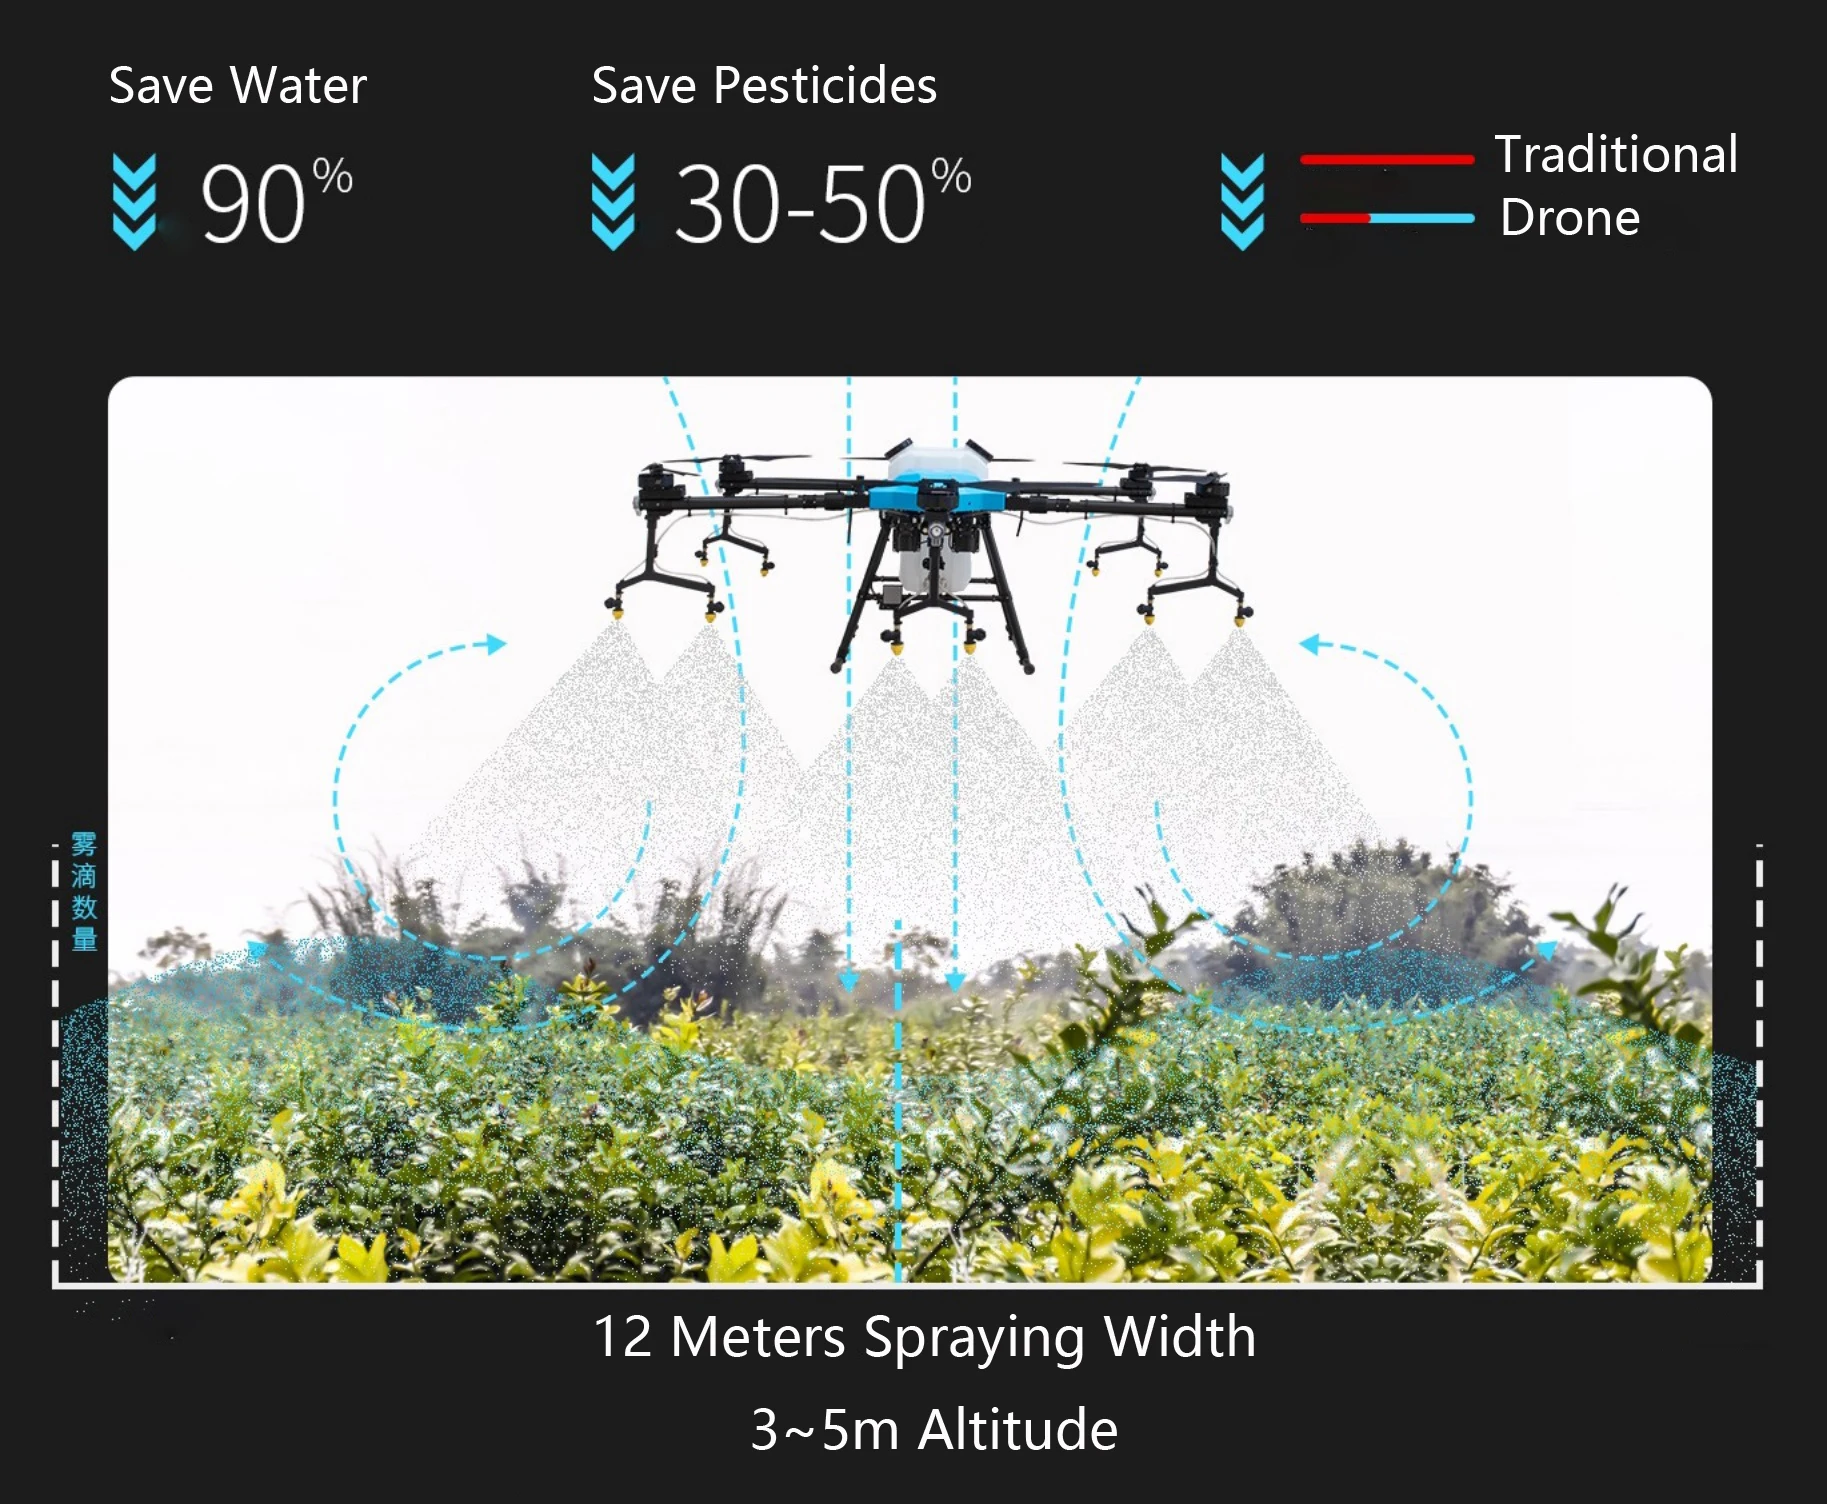 Yuanmu GF-30 30L Agriculture Drone, Save Water Save Pesticides Traditional  90% 30-50% Drone I 1 12 Meter